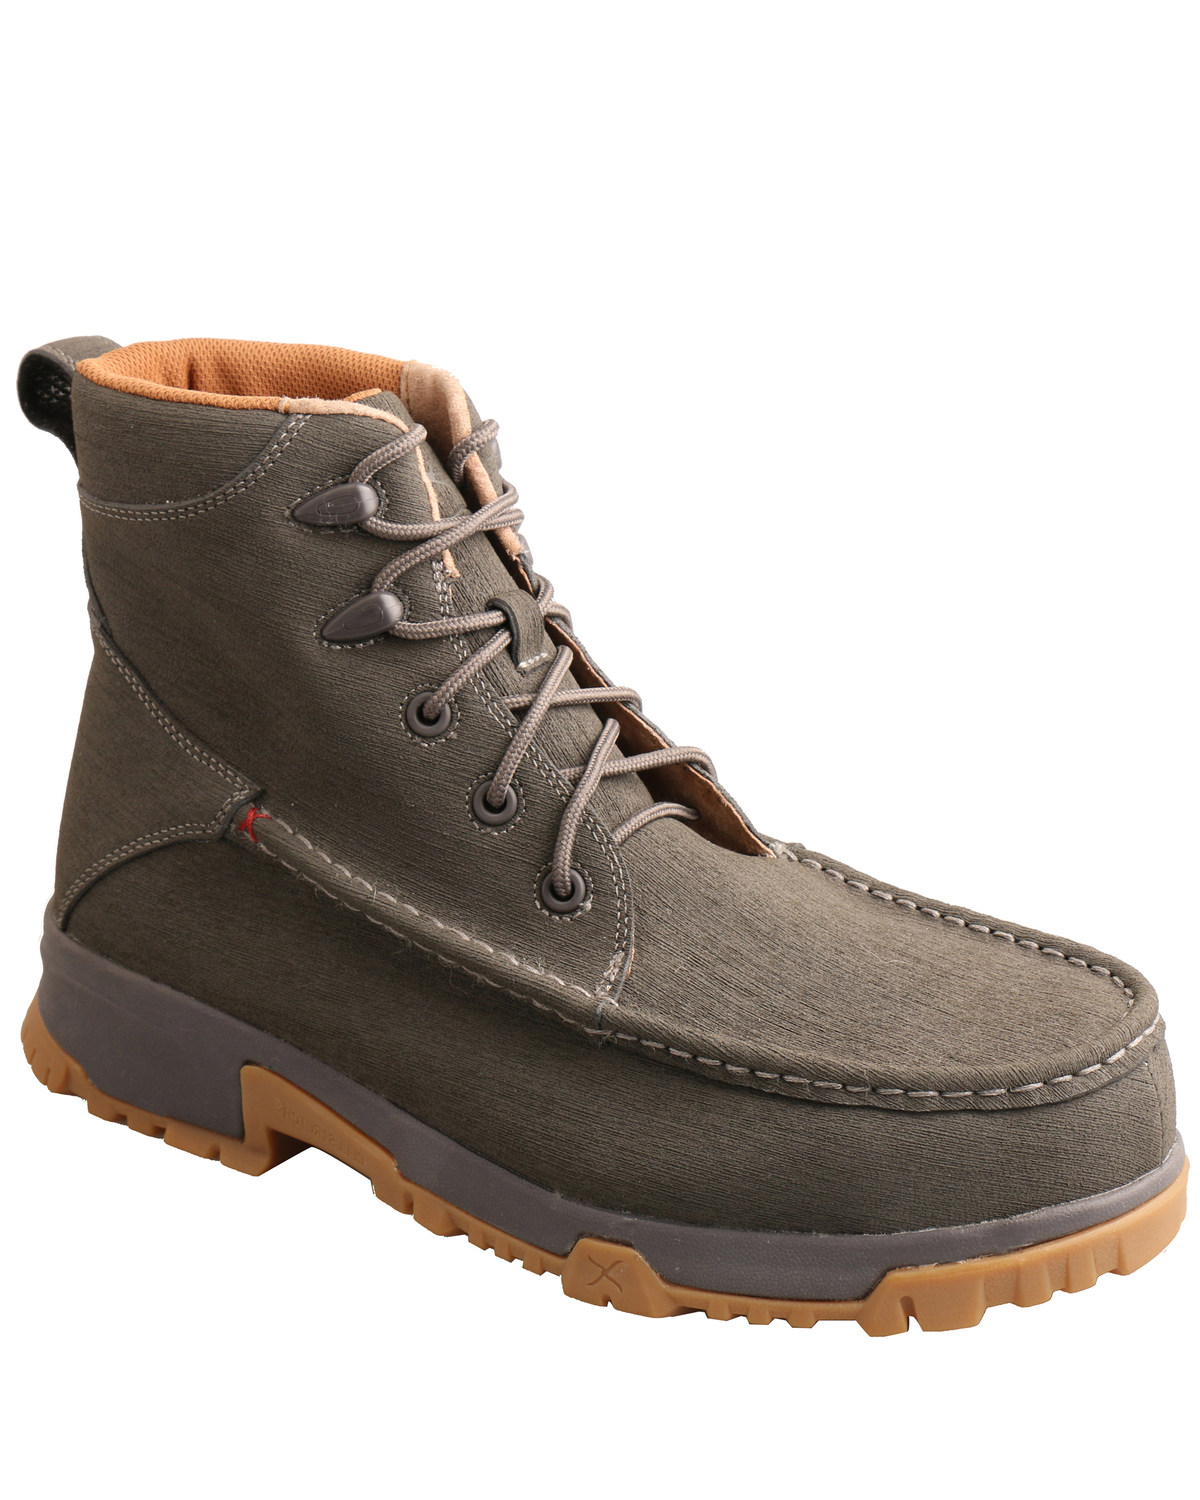 Twisted X Men's Gray Work Boots - Soft Toe